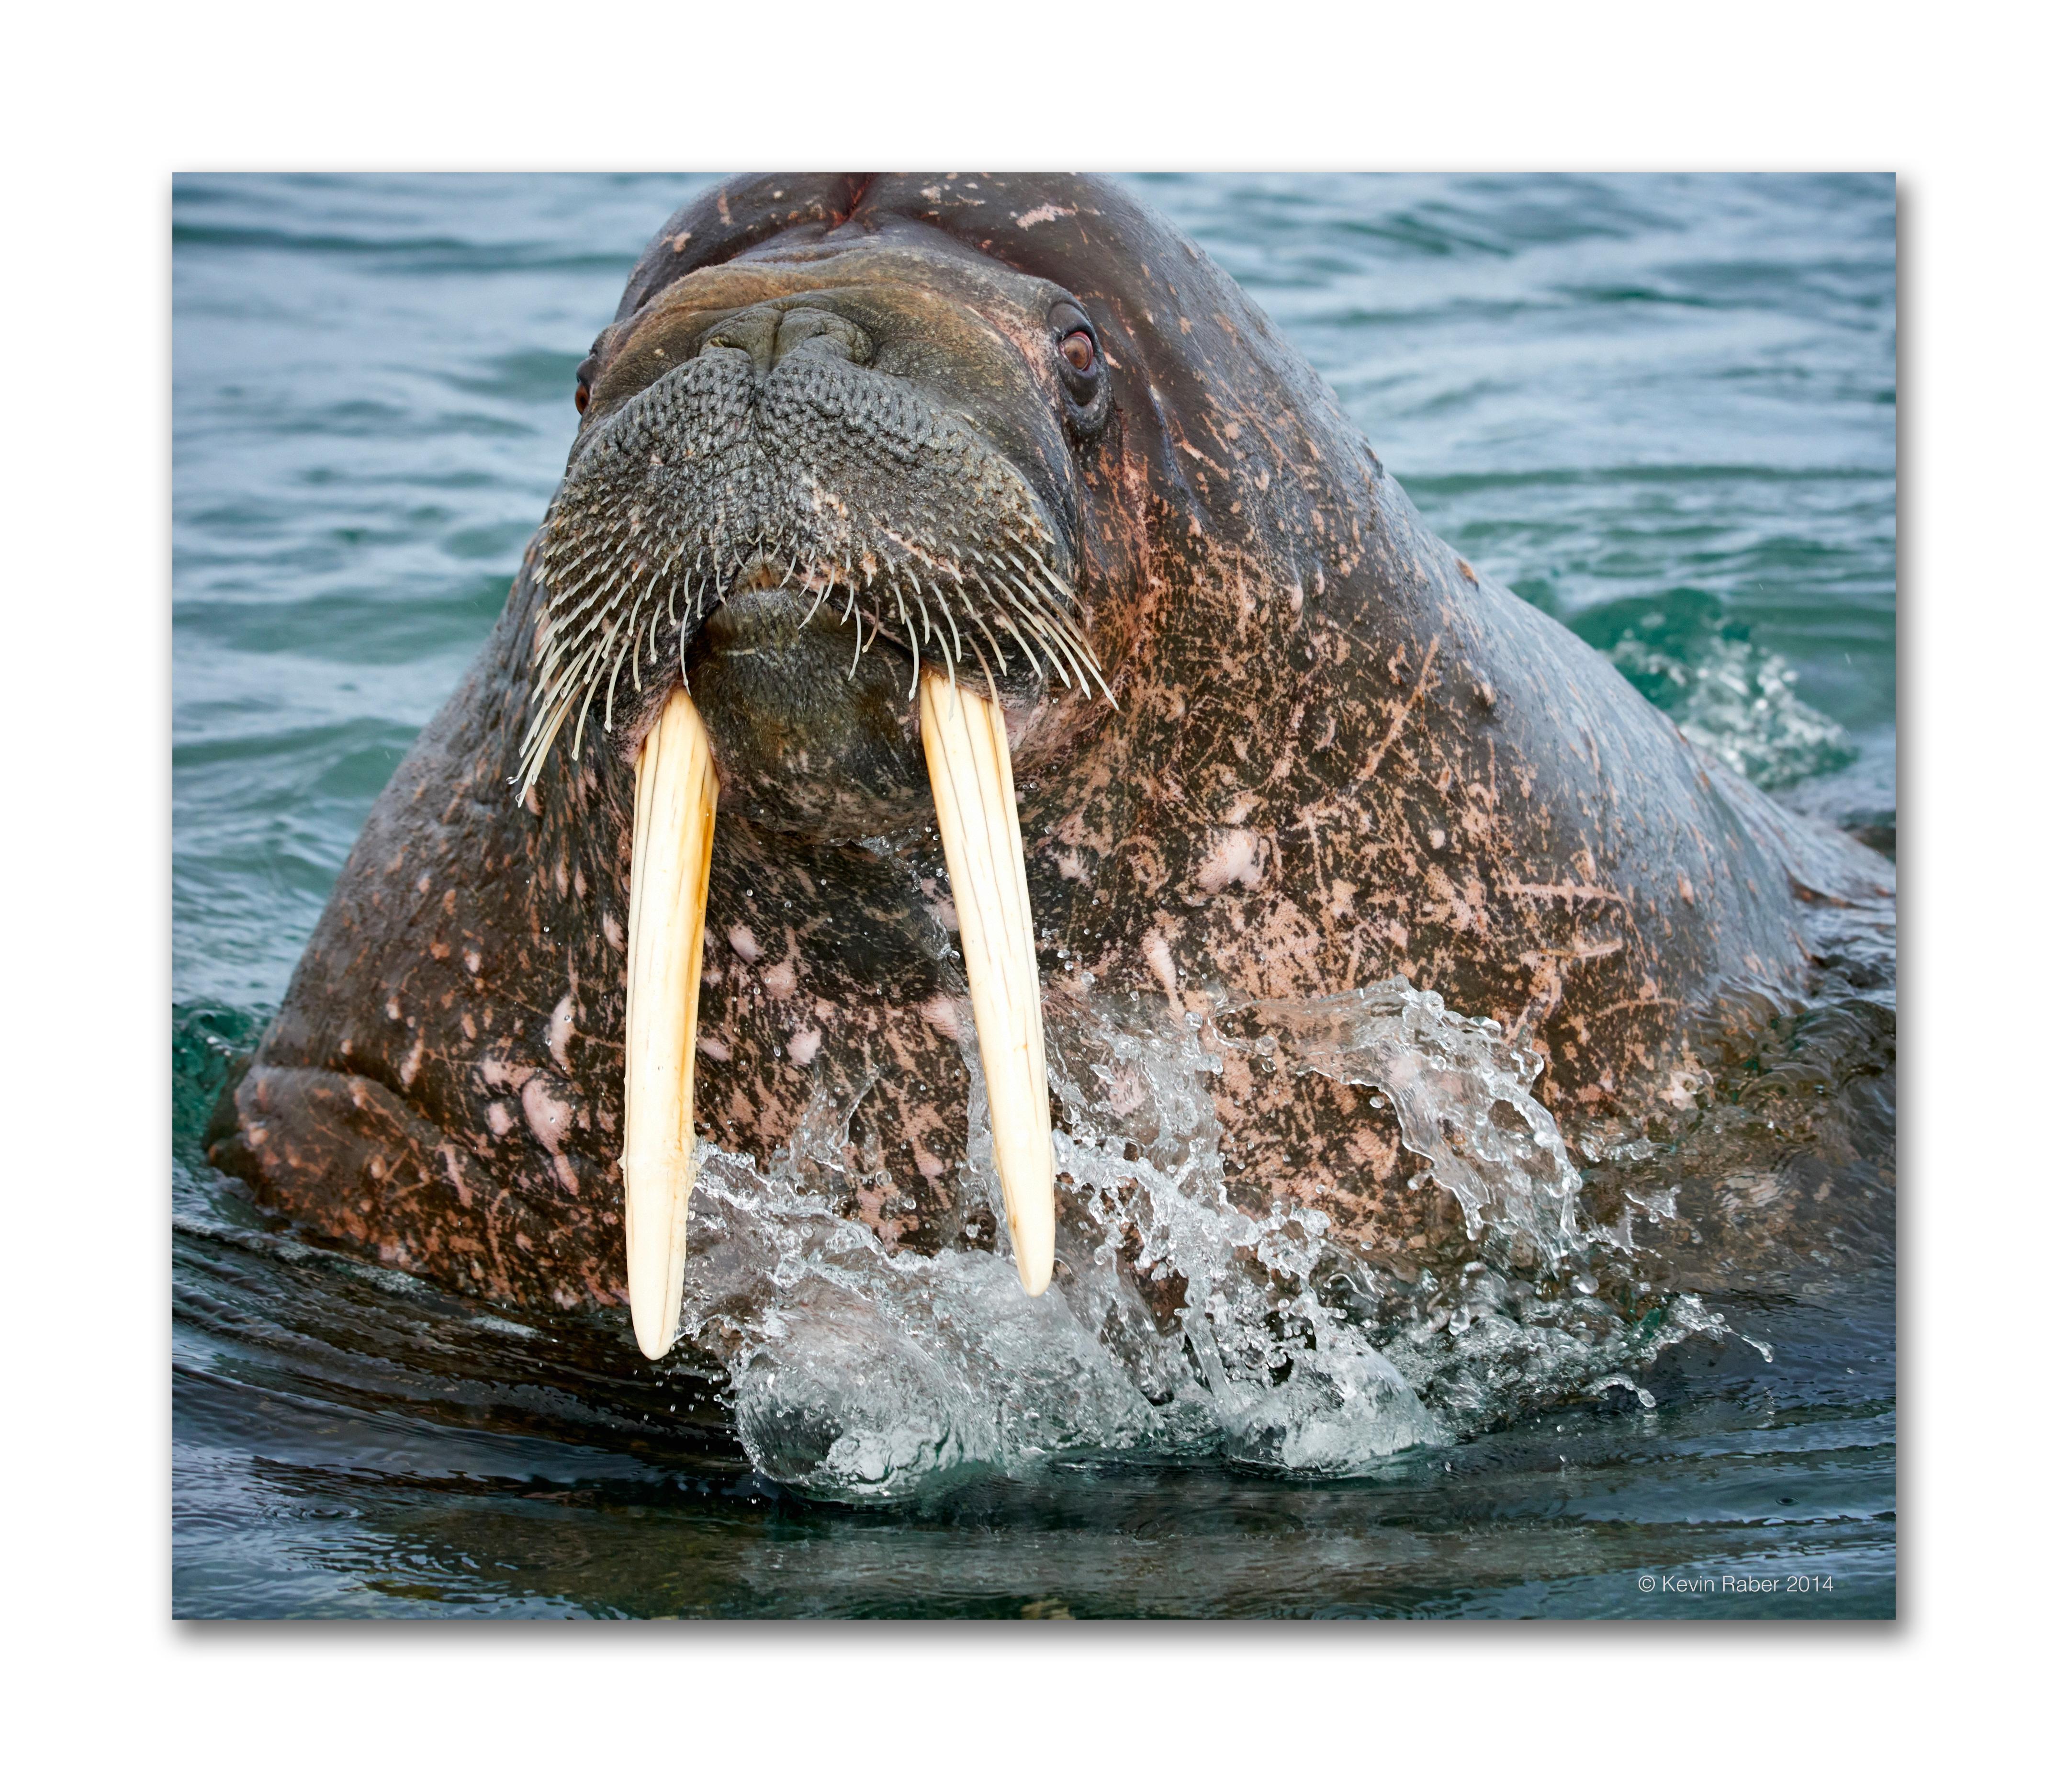 A walrus surfaces